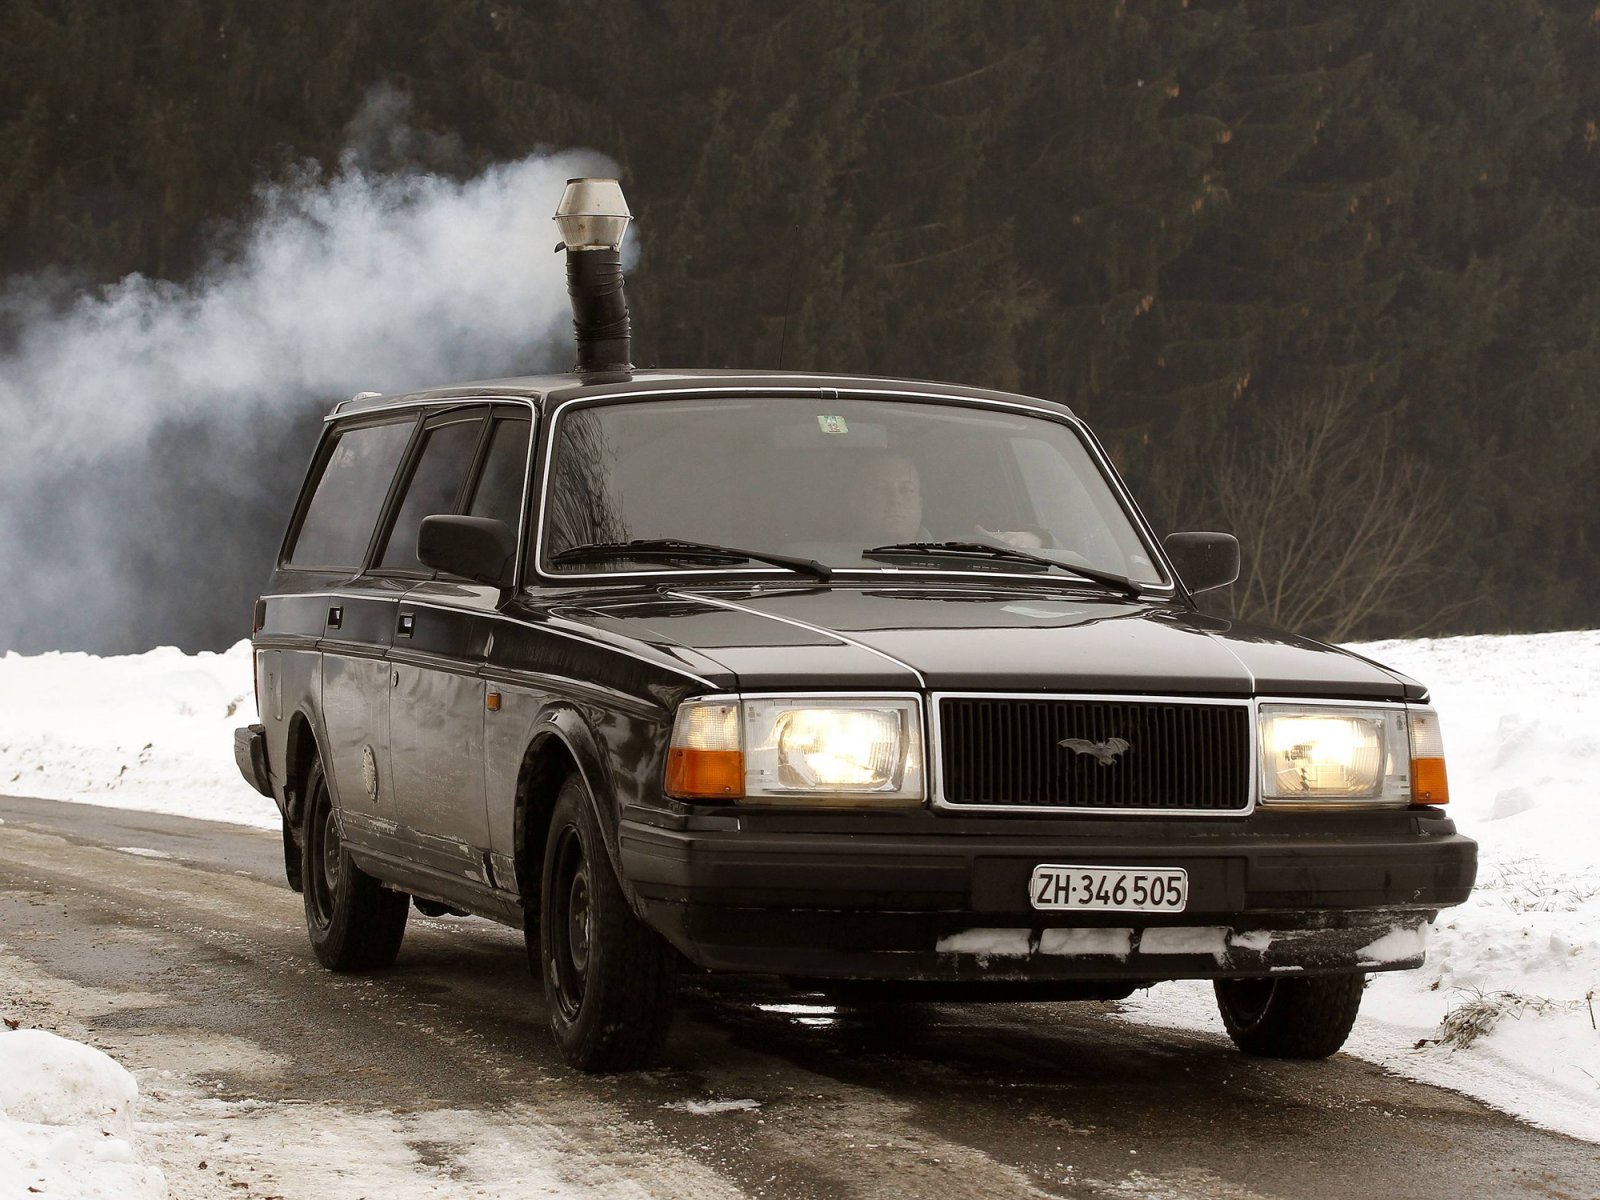 Video: A Wood Stove is a Unique Way to Heat a Volvo